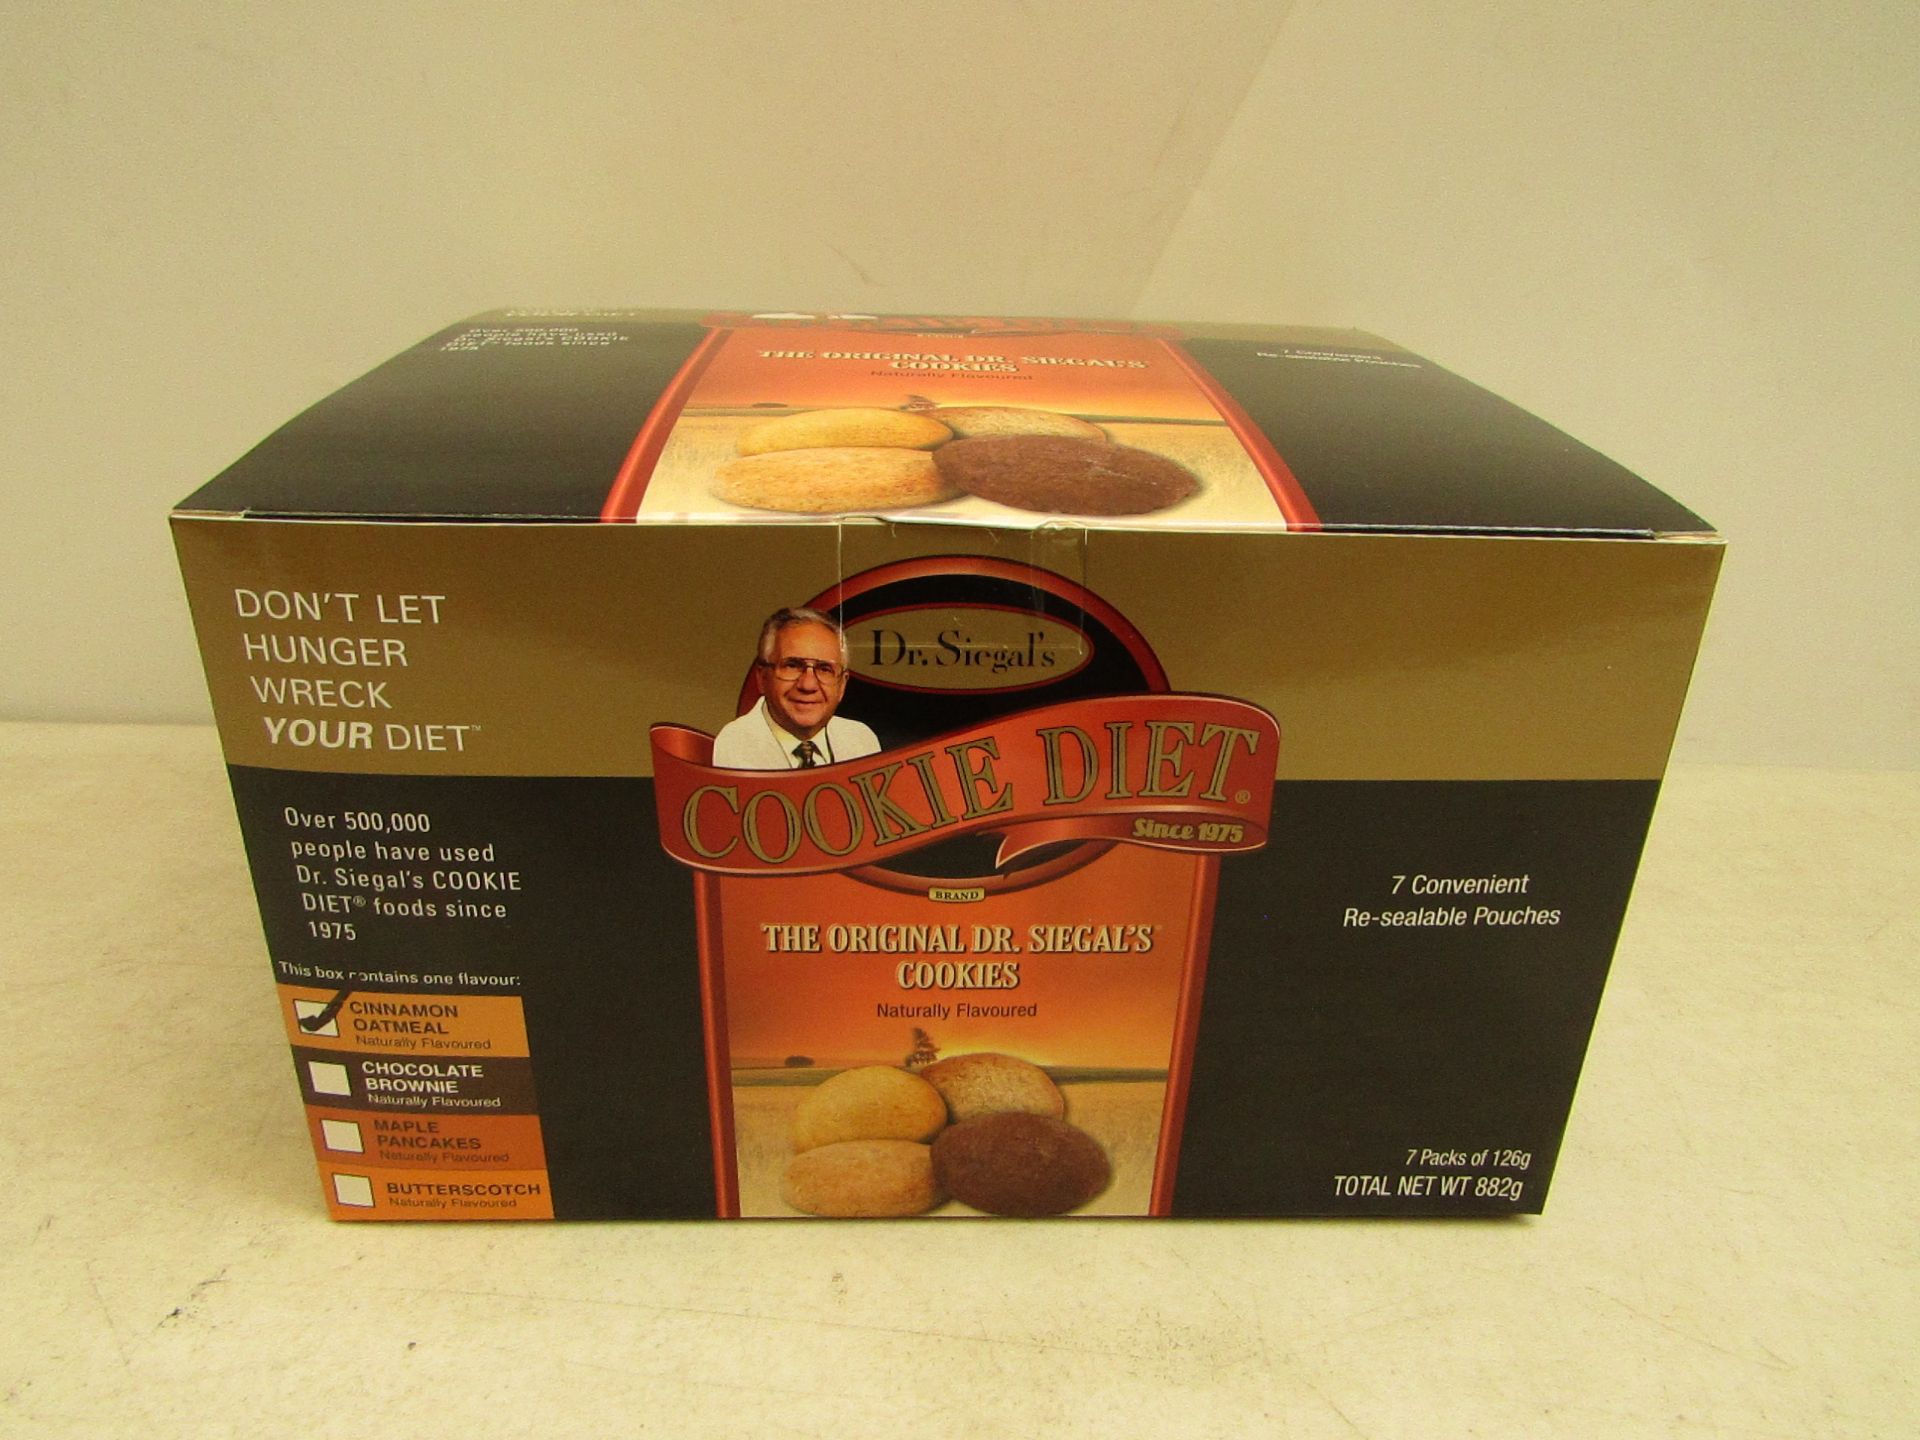 Dr Siegal's cookie diet maple pancakes, new and packaged. B.B 12th April 2017.